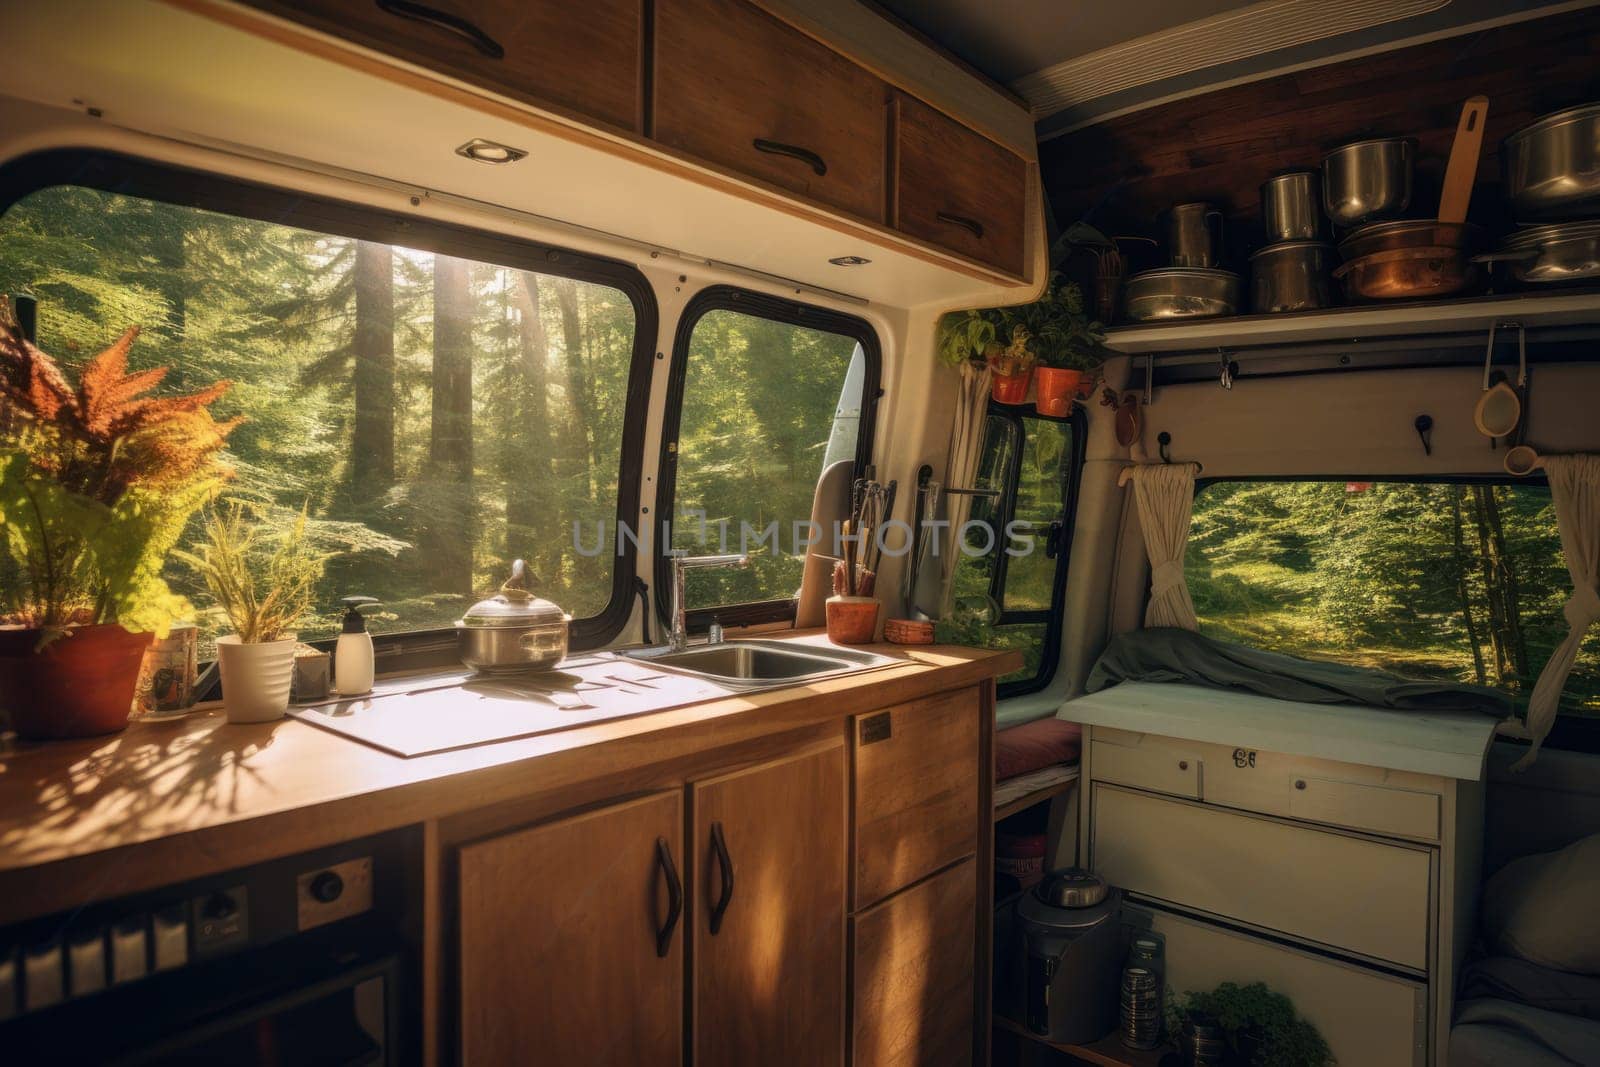 Mobile Kitchen campervan. Generate Ai by ylivdesign